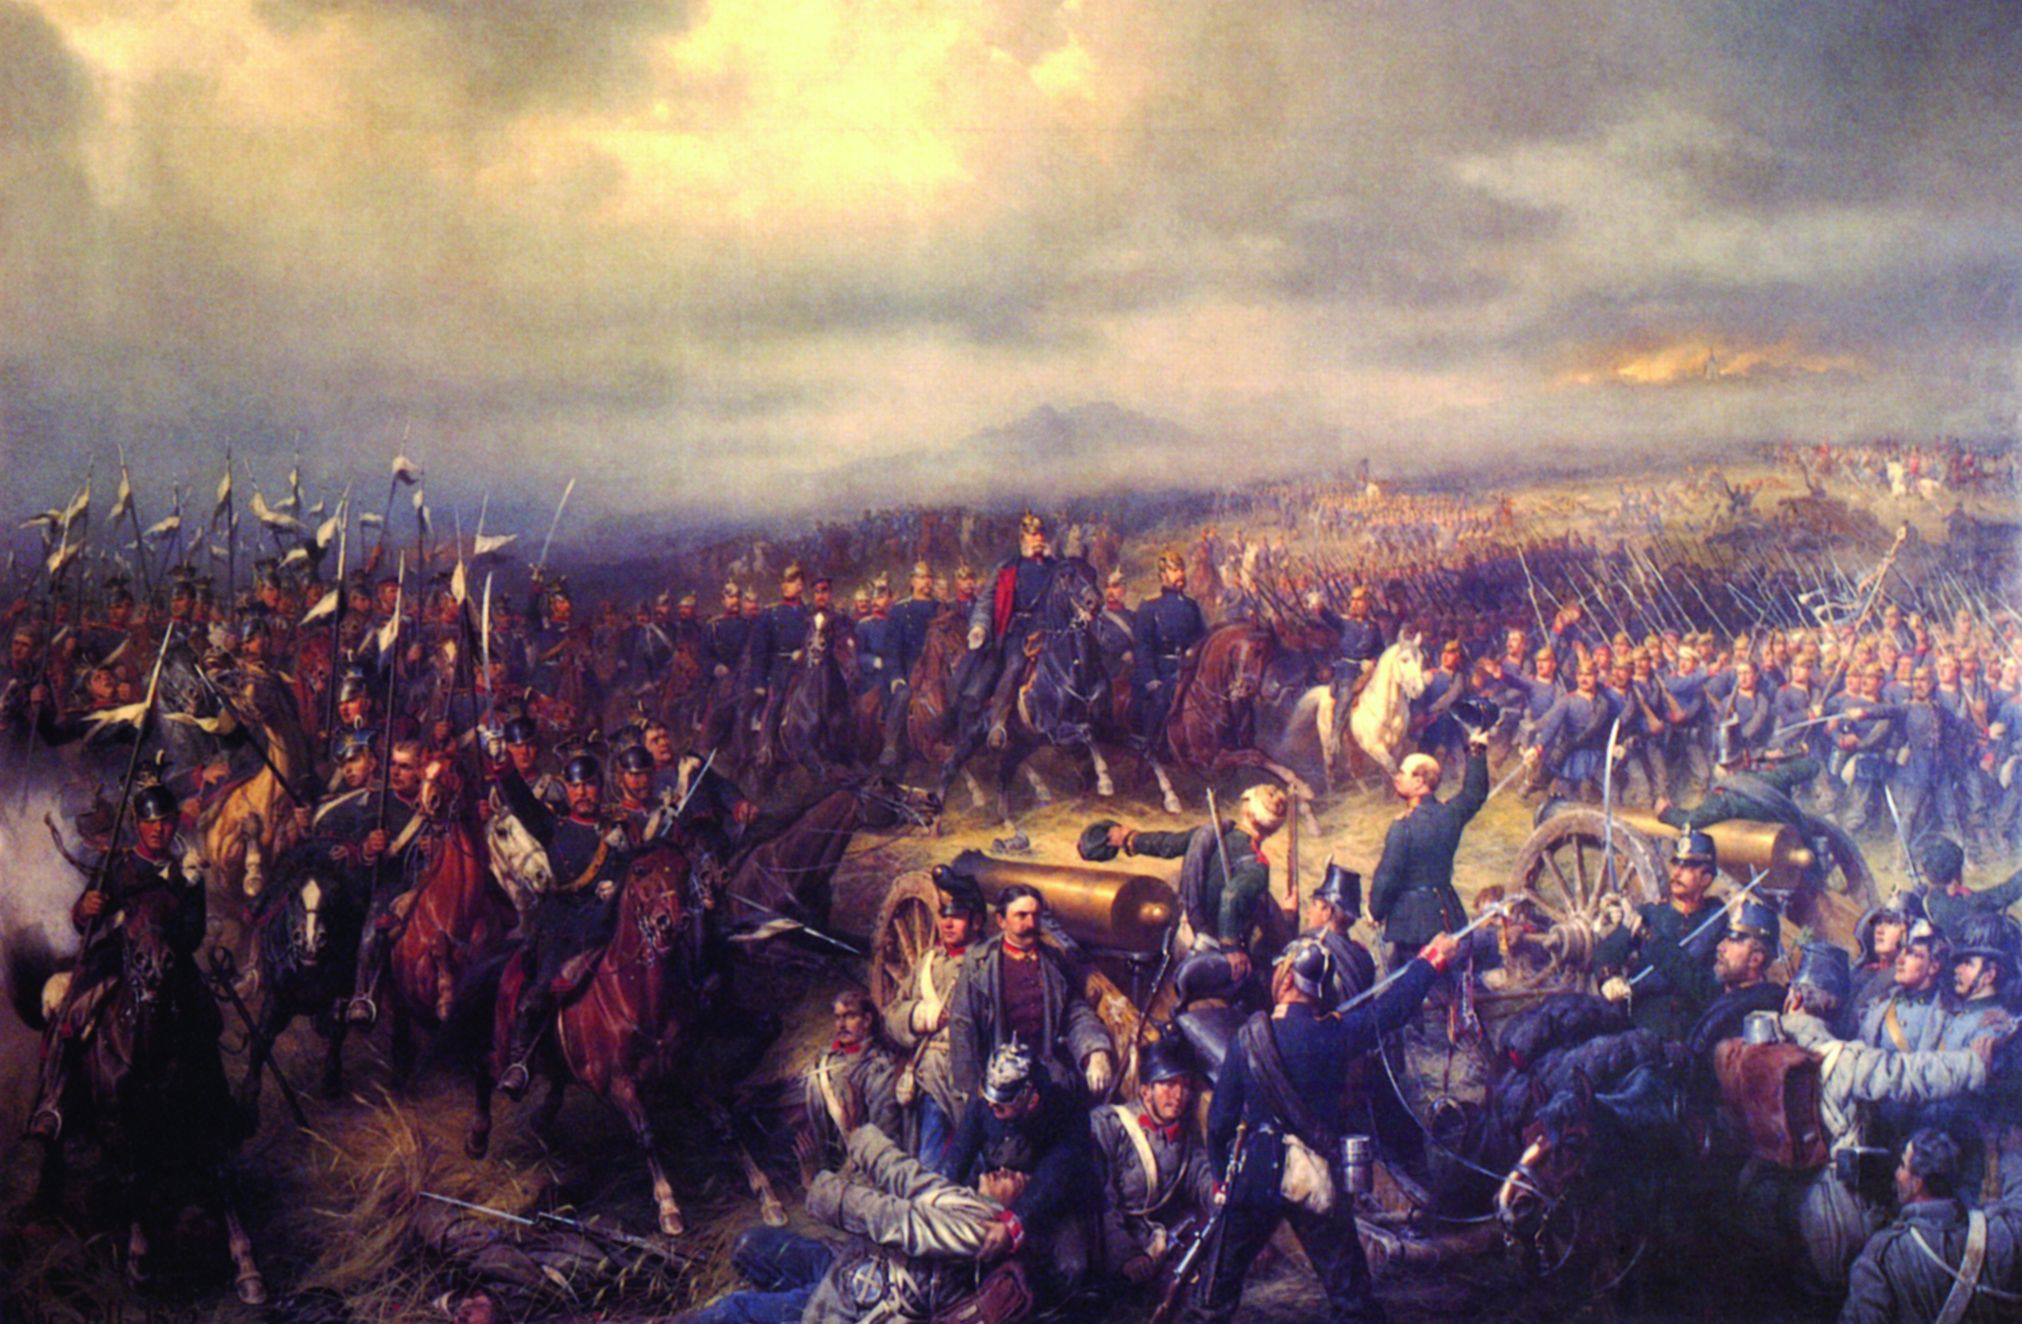 At the Battle of Sadowa, on July 3, 1866, the better organized Prussians decisively defeated the Austrian Army and won the Seven Weeks’ War. 